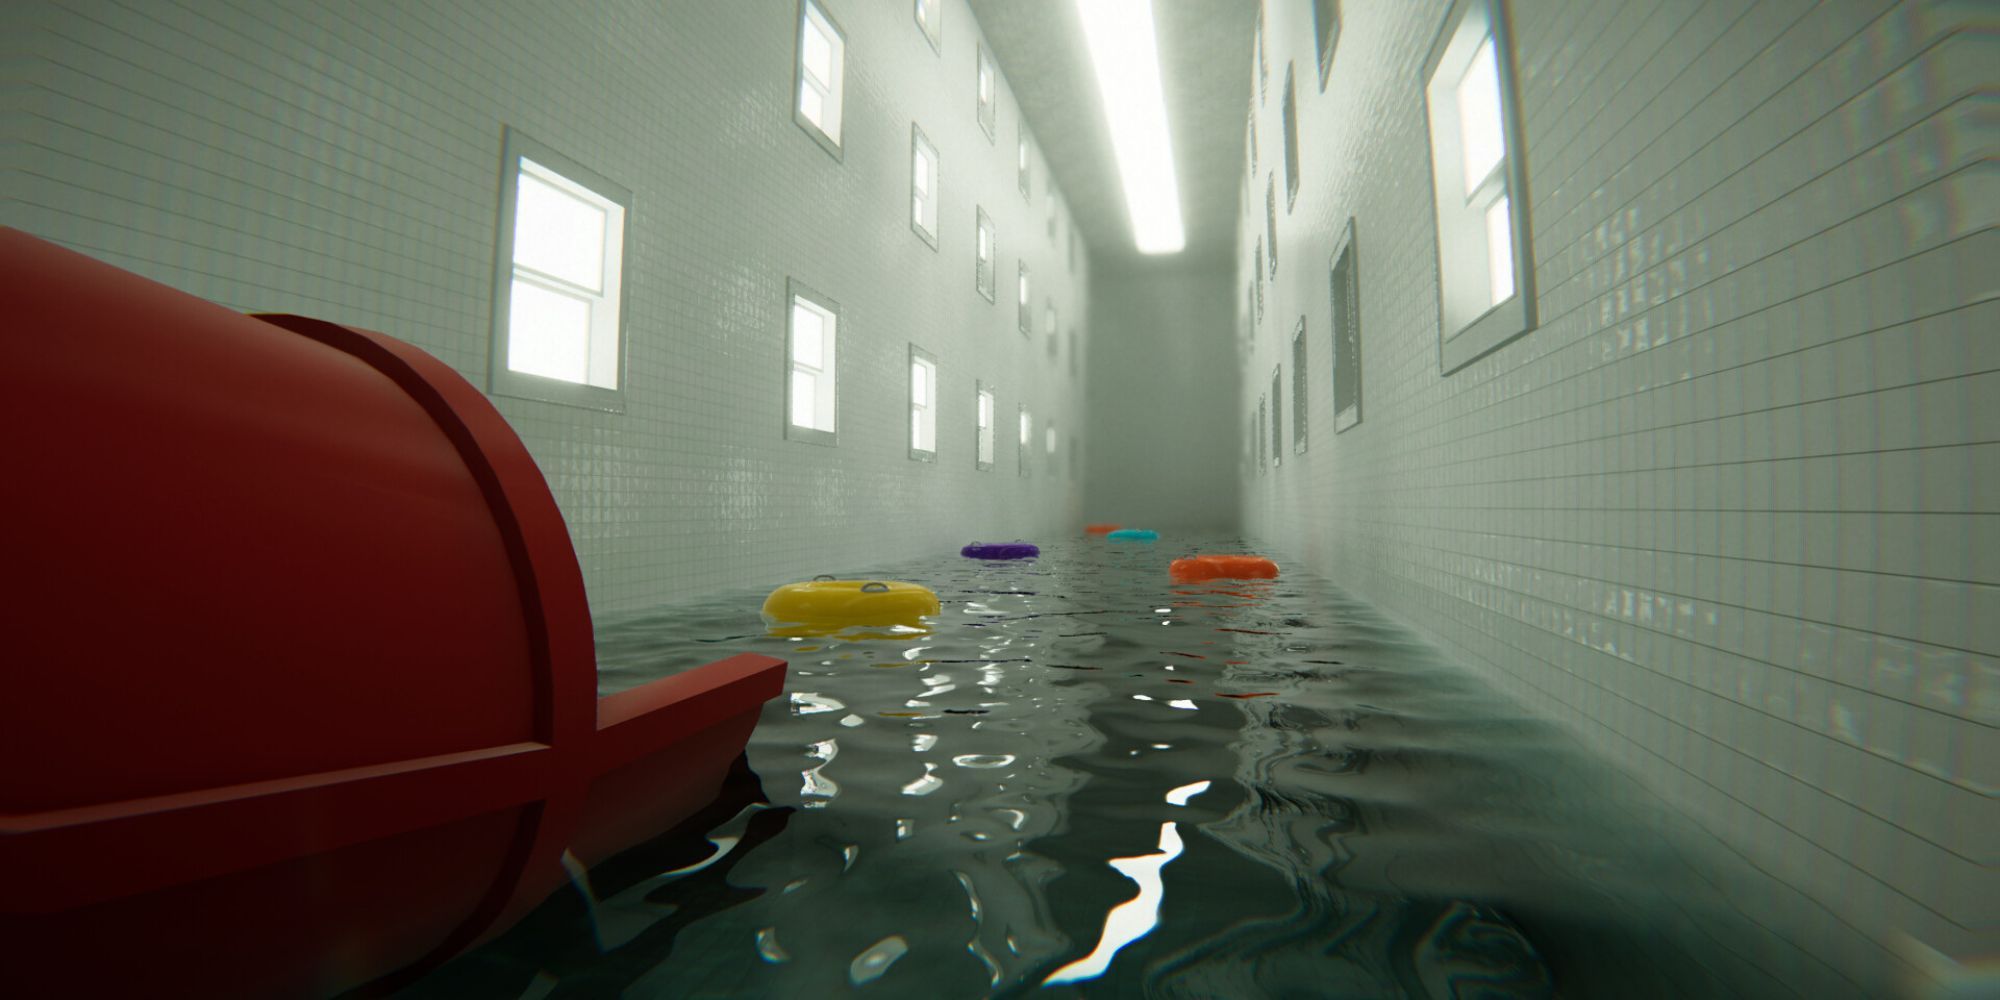 Still from Pools of a red slide going into a swimming pool with rubber rings and windows on the side.